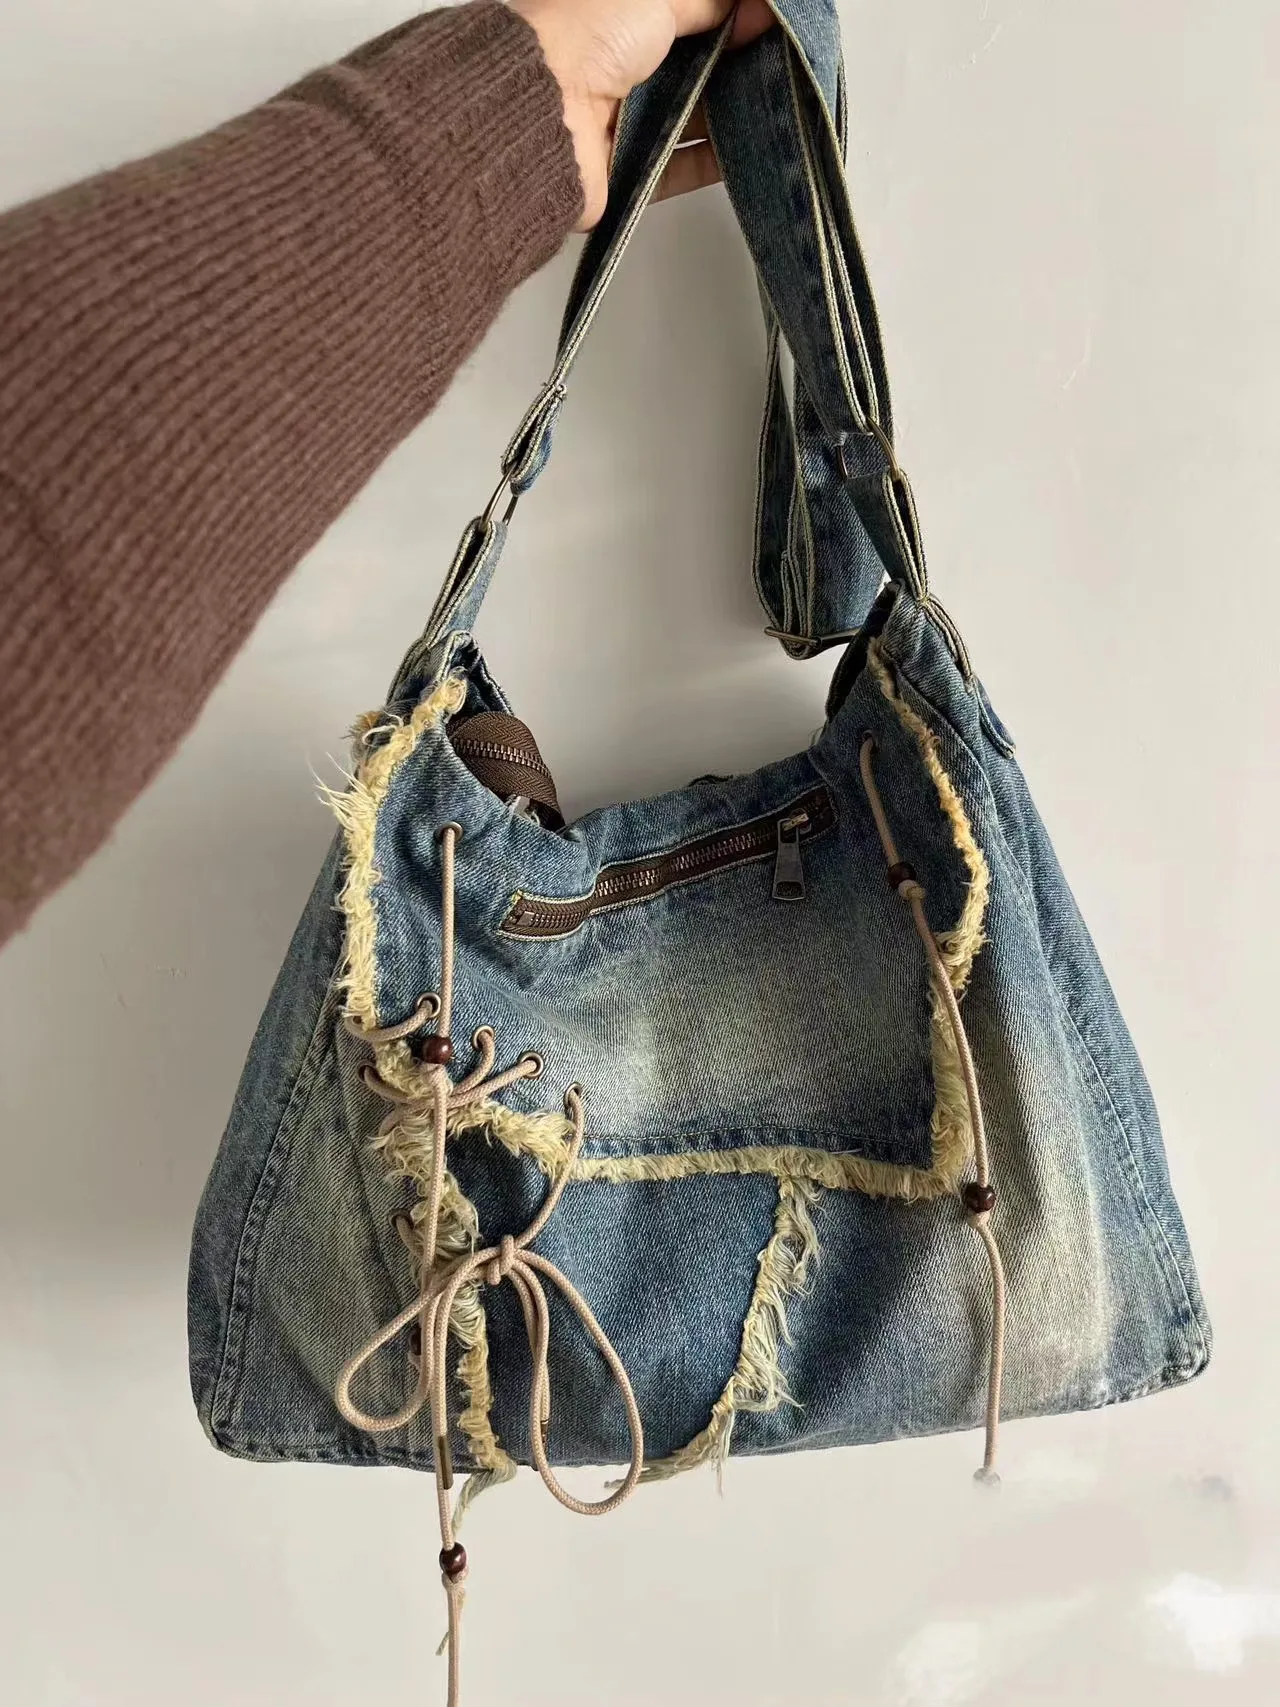 Washed Denim Jeans Casual Totes for Women Shoulder Bags Soft Student Lar... - $44.81